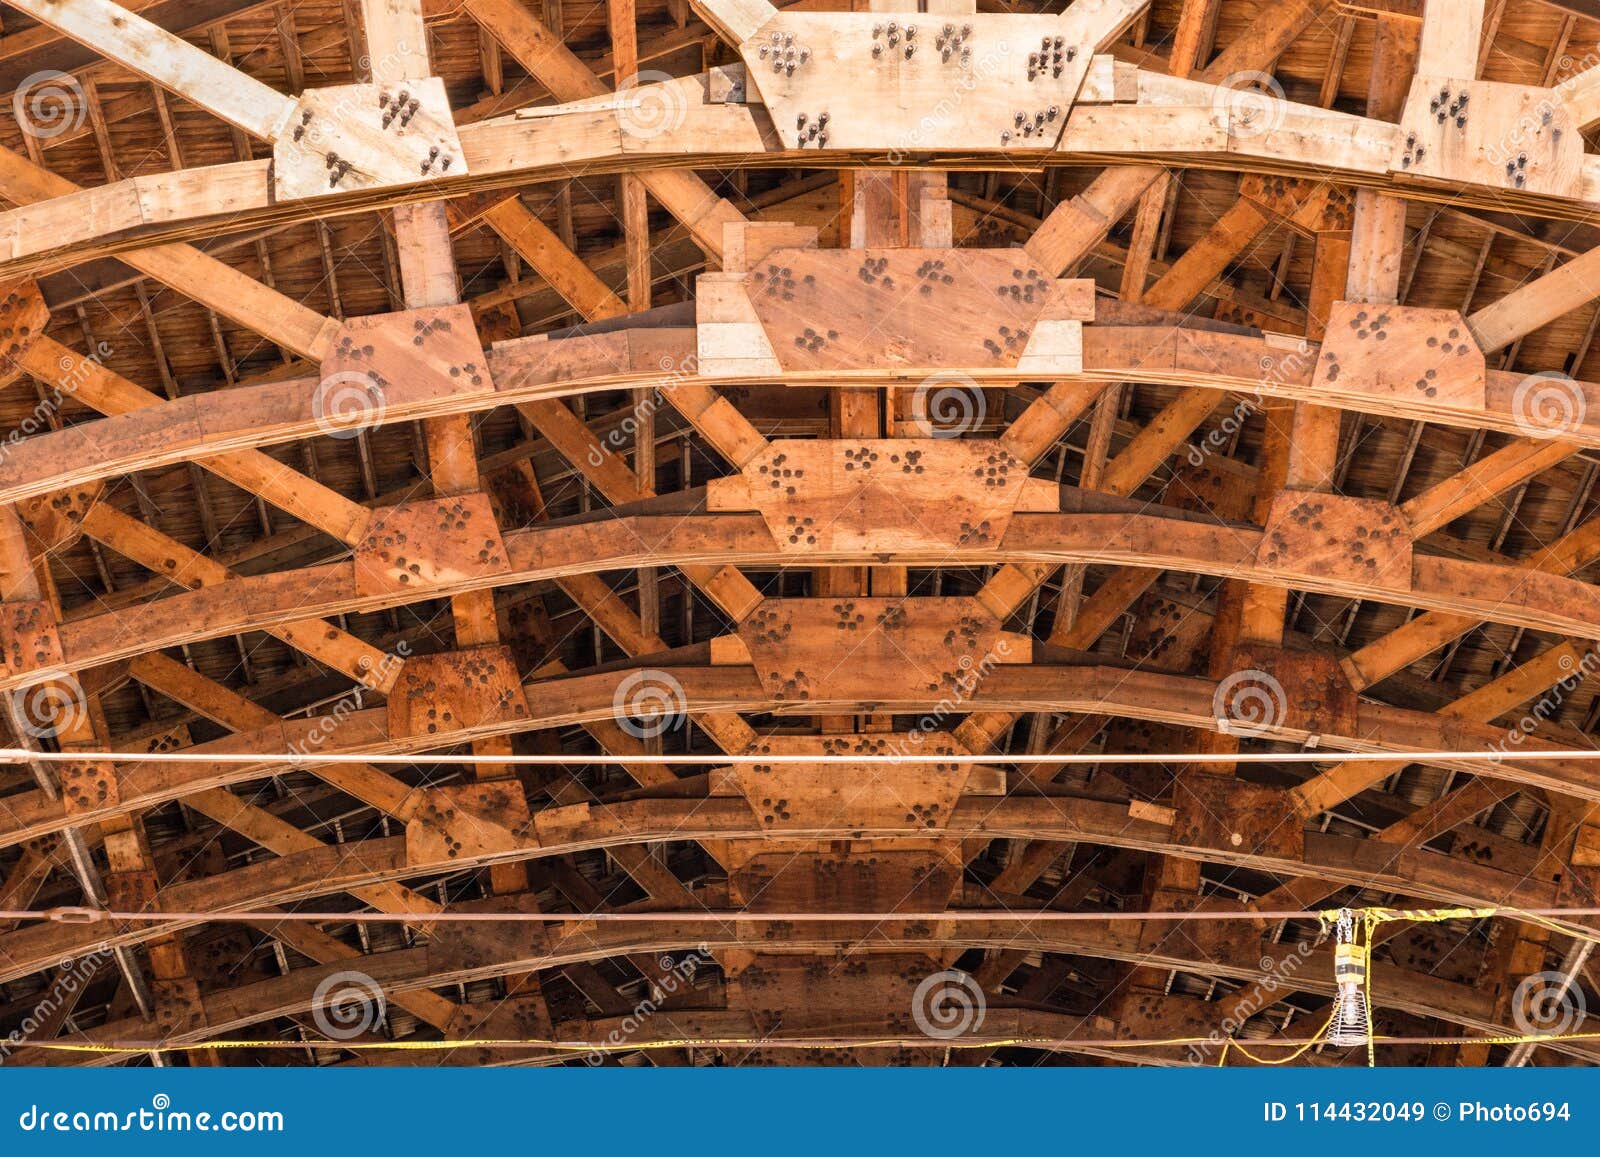 Roof Frame And Ceiling Architectural Background Stock